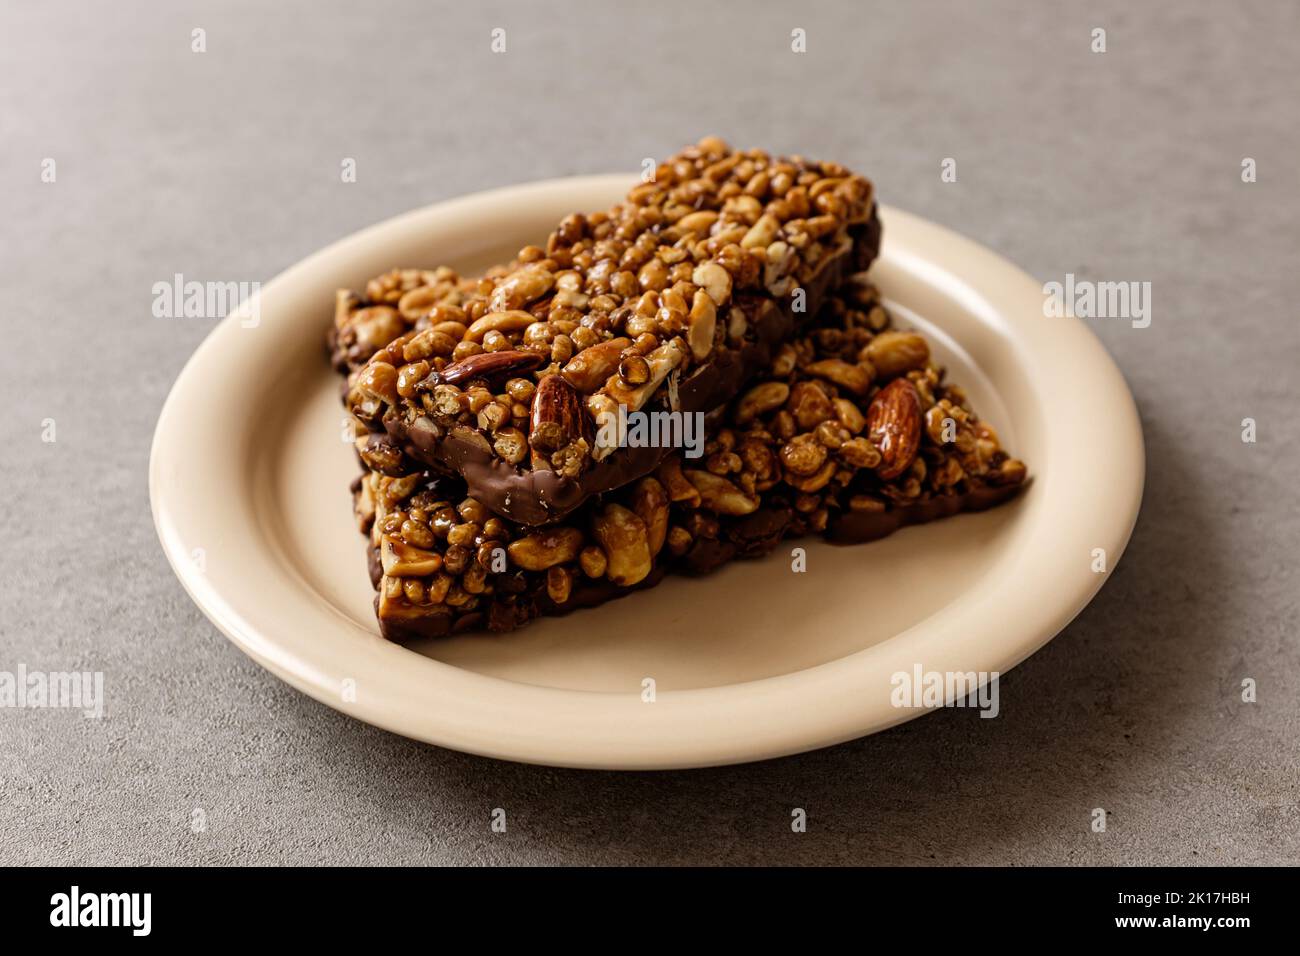 Snacks with Granola. Snacks with Nuts. diet meal replacement Stock Photo